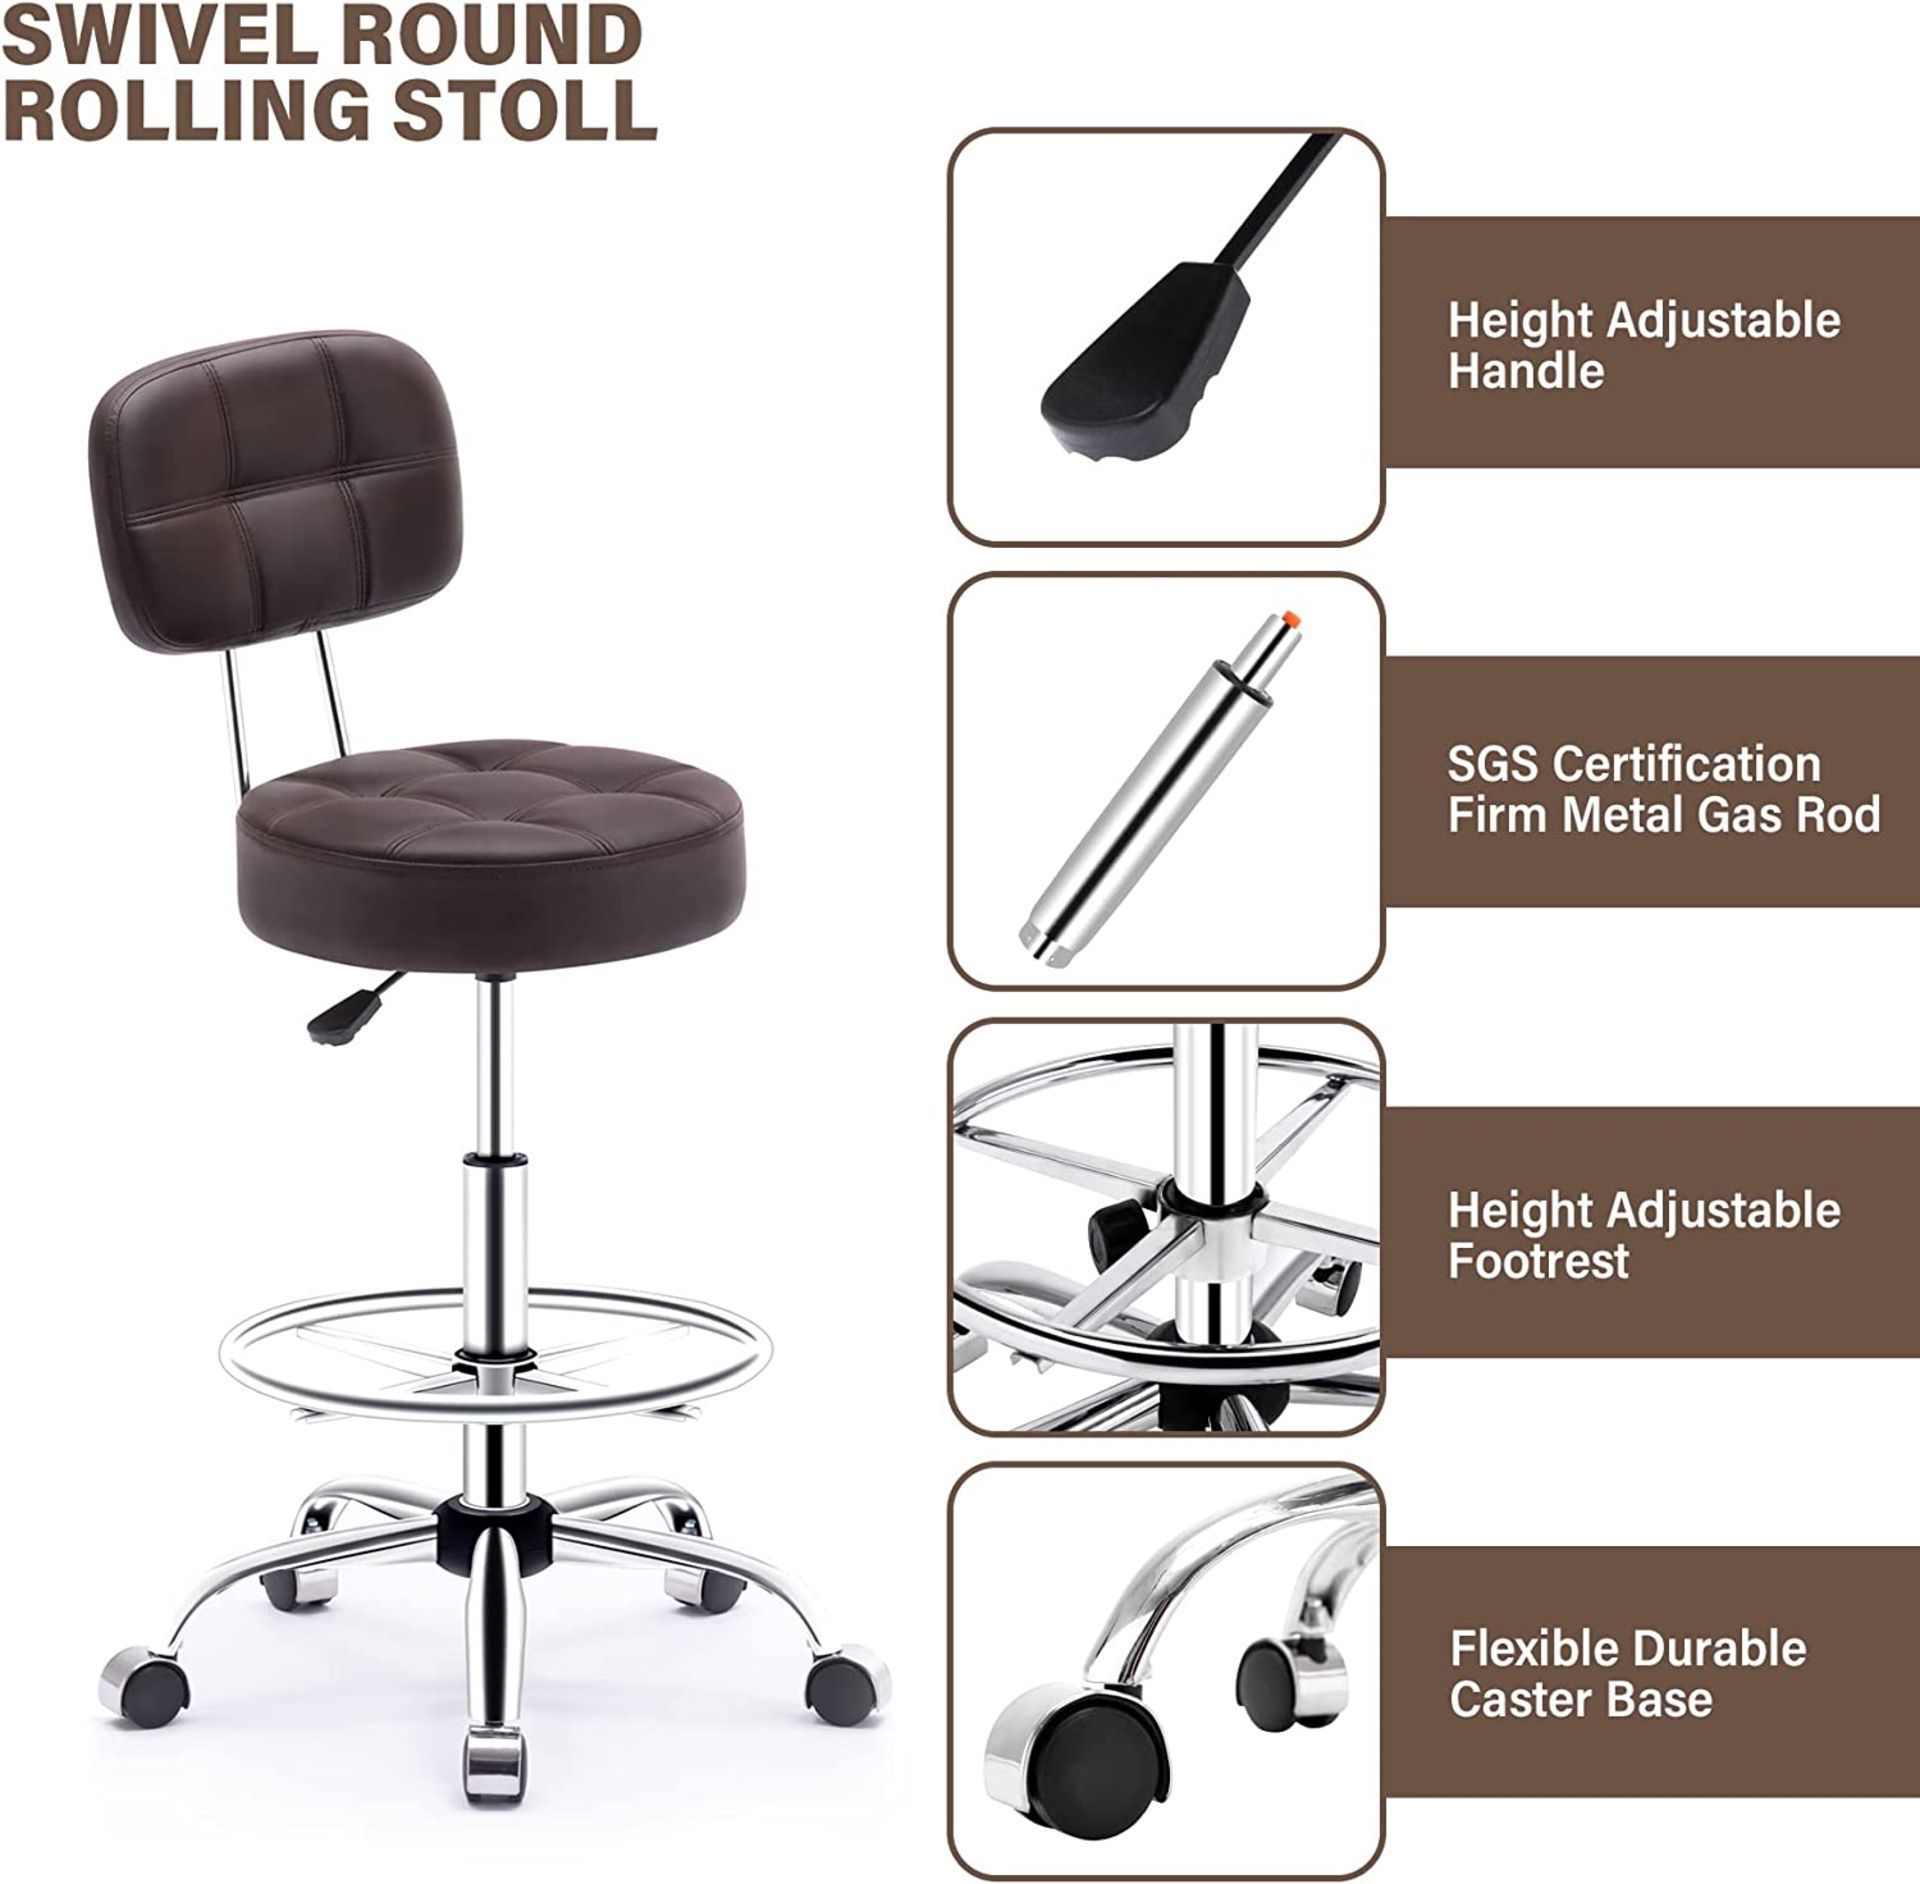 NEW Rolling stool with High Backrest and Adjustable Footrest, Leather Massage Stool Ergonomic - Image 5 of 5